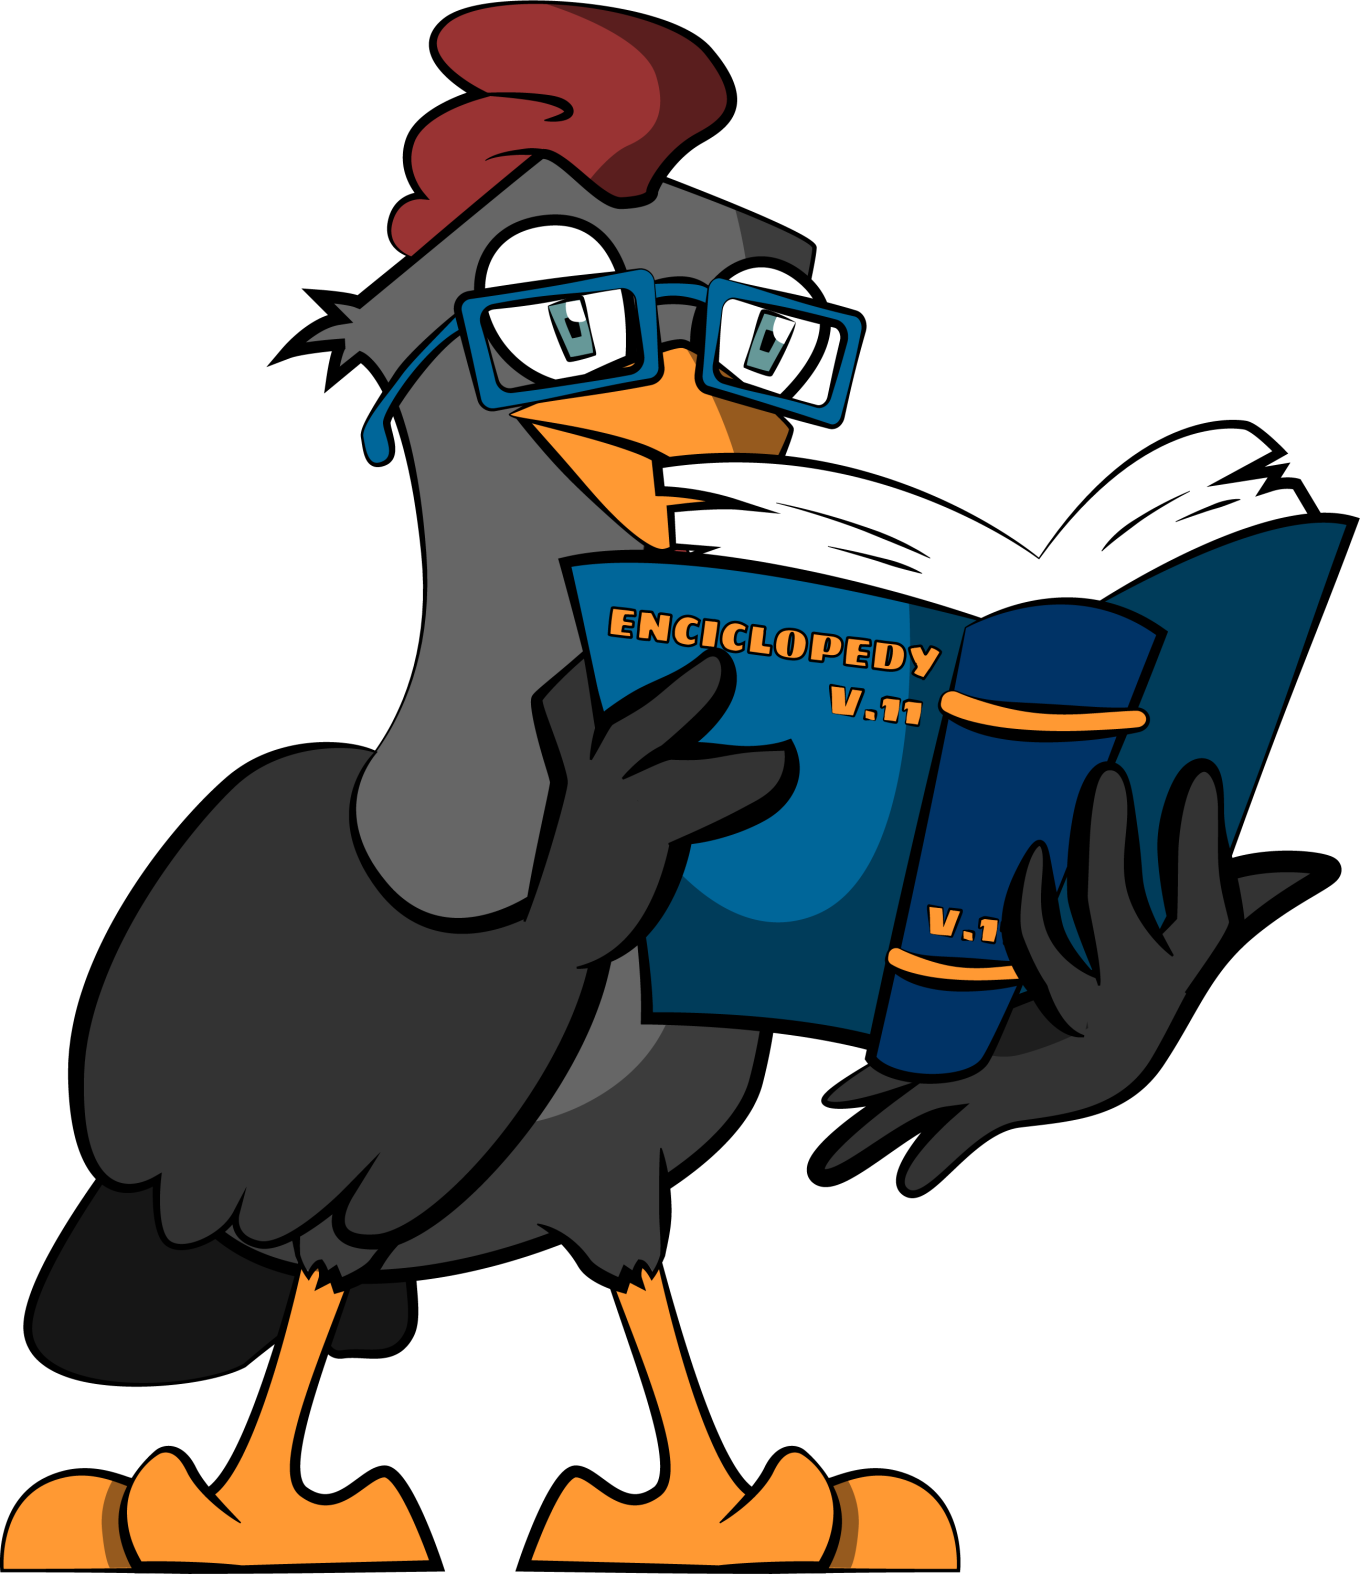 A chicken with an encyclopedia